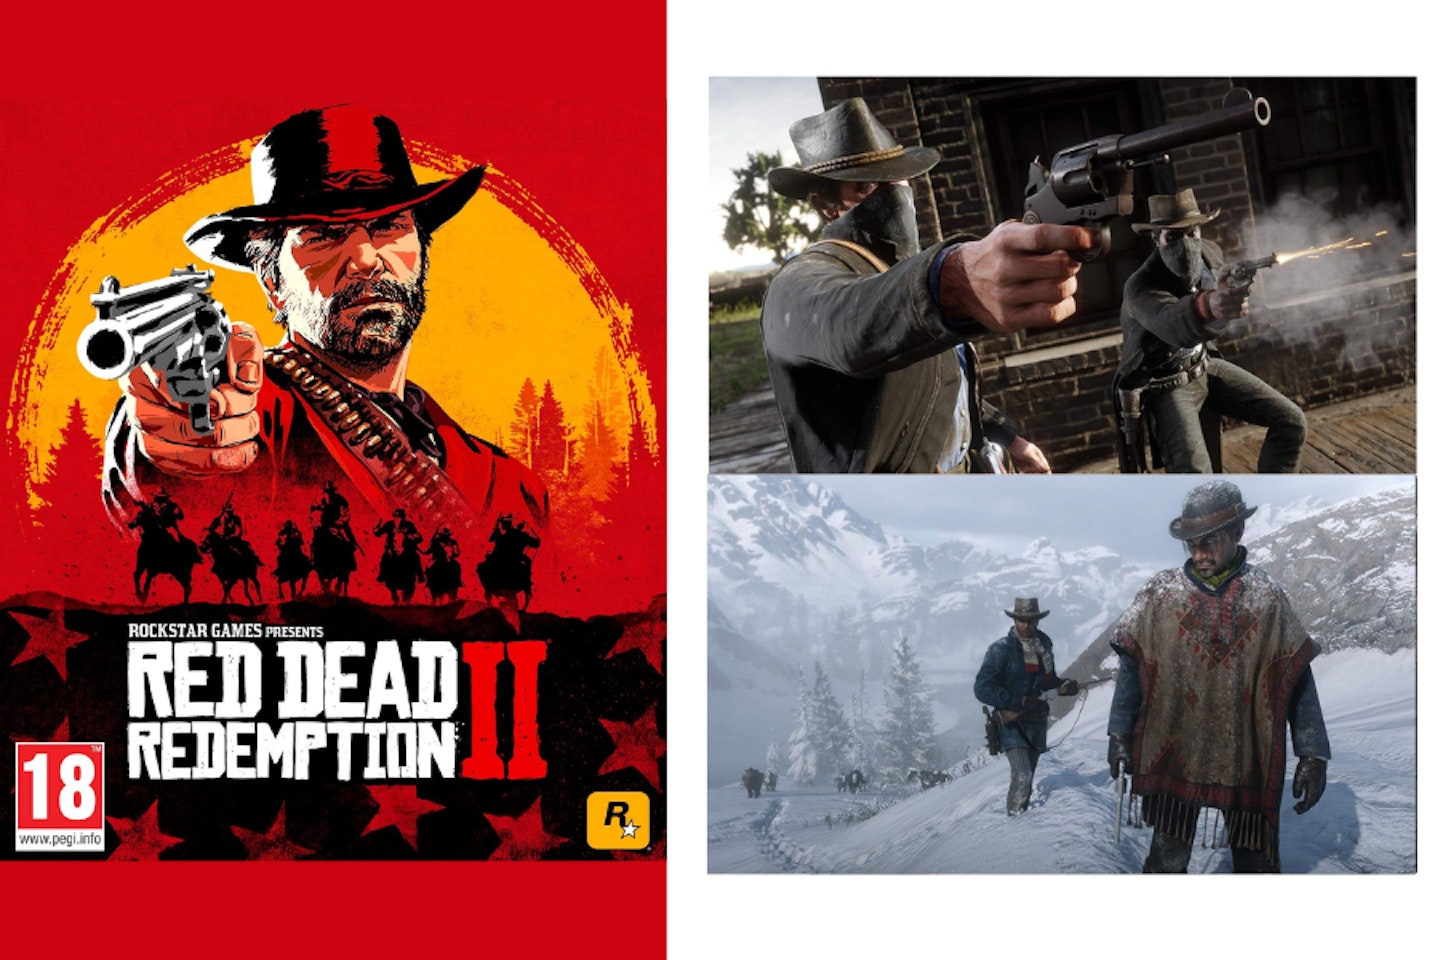 Red Dead Redemption 2 - one of the best PC games